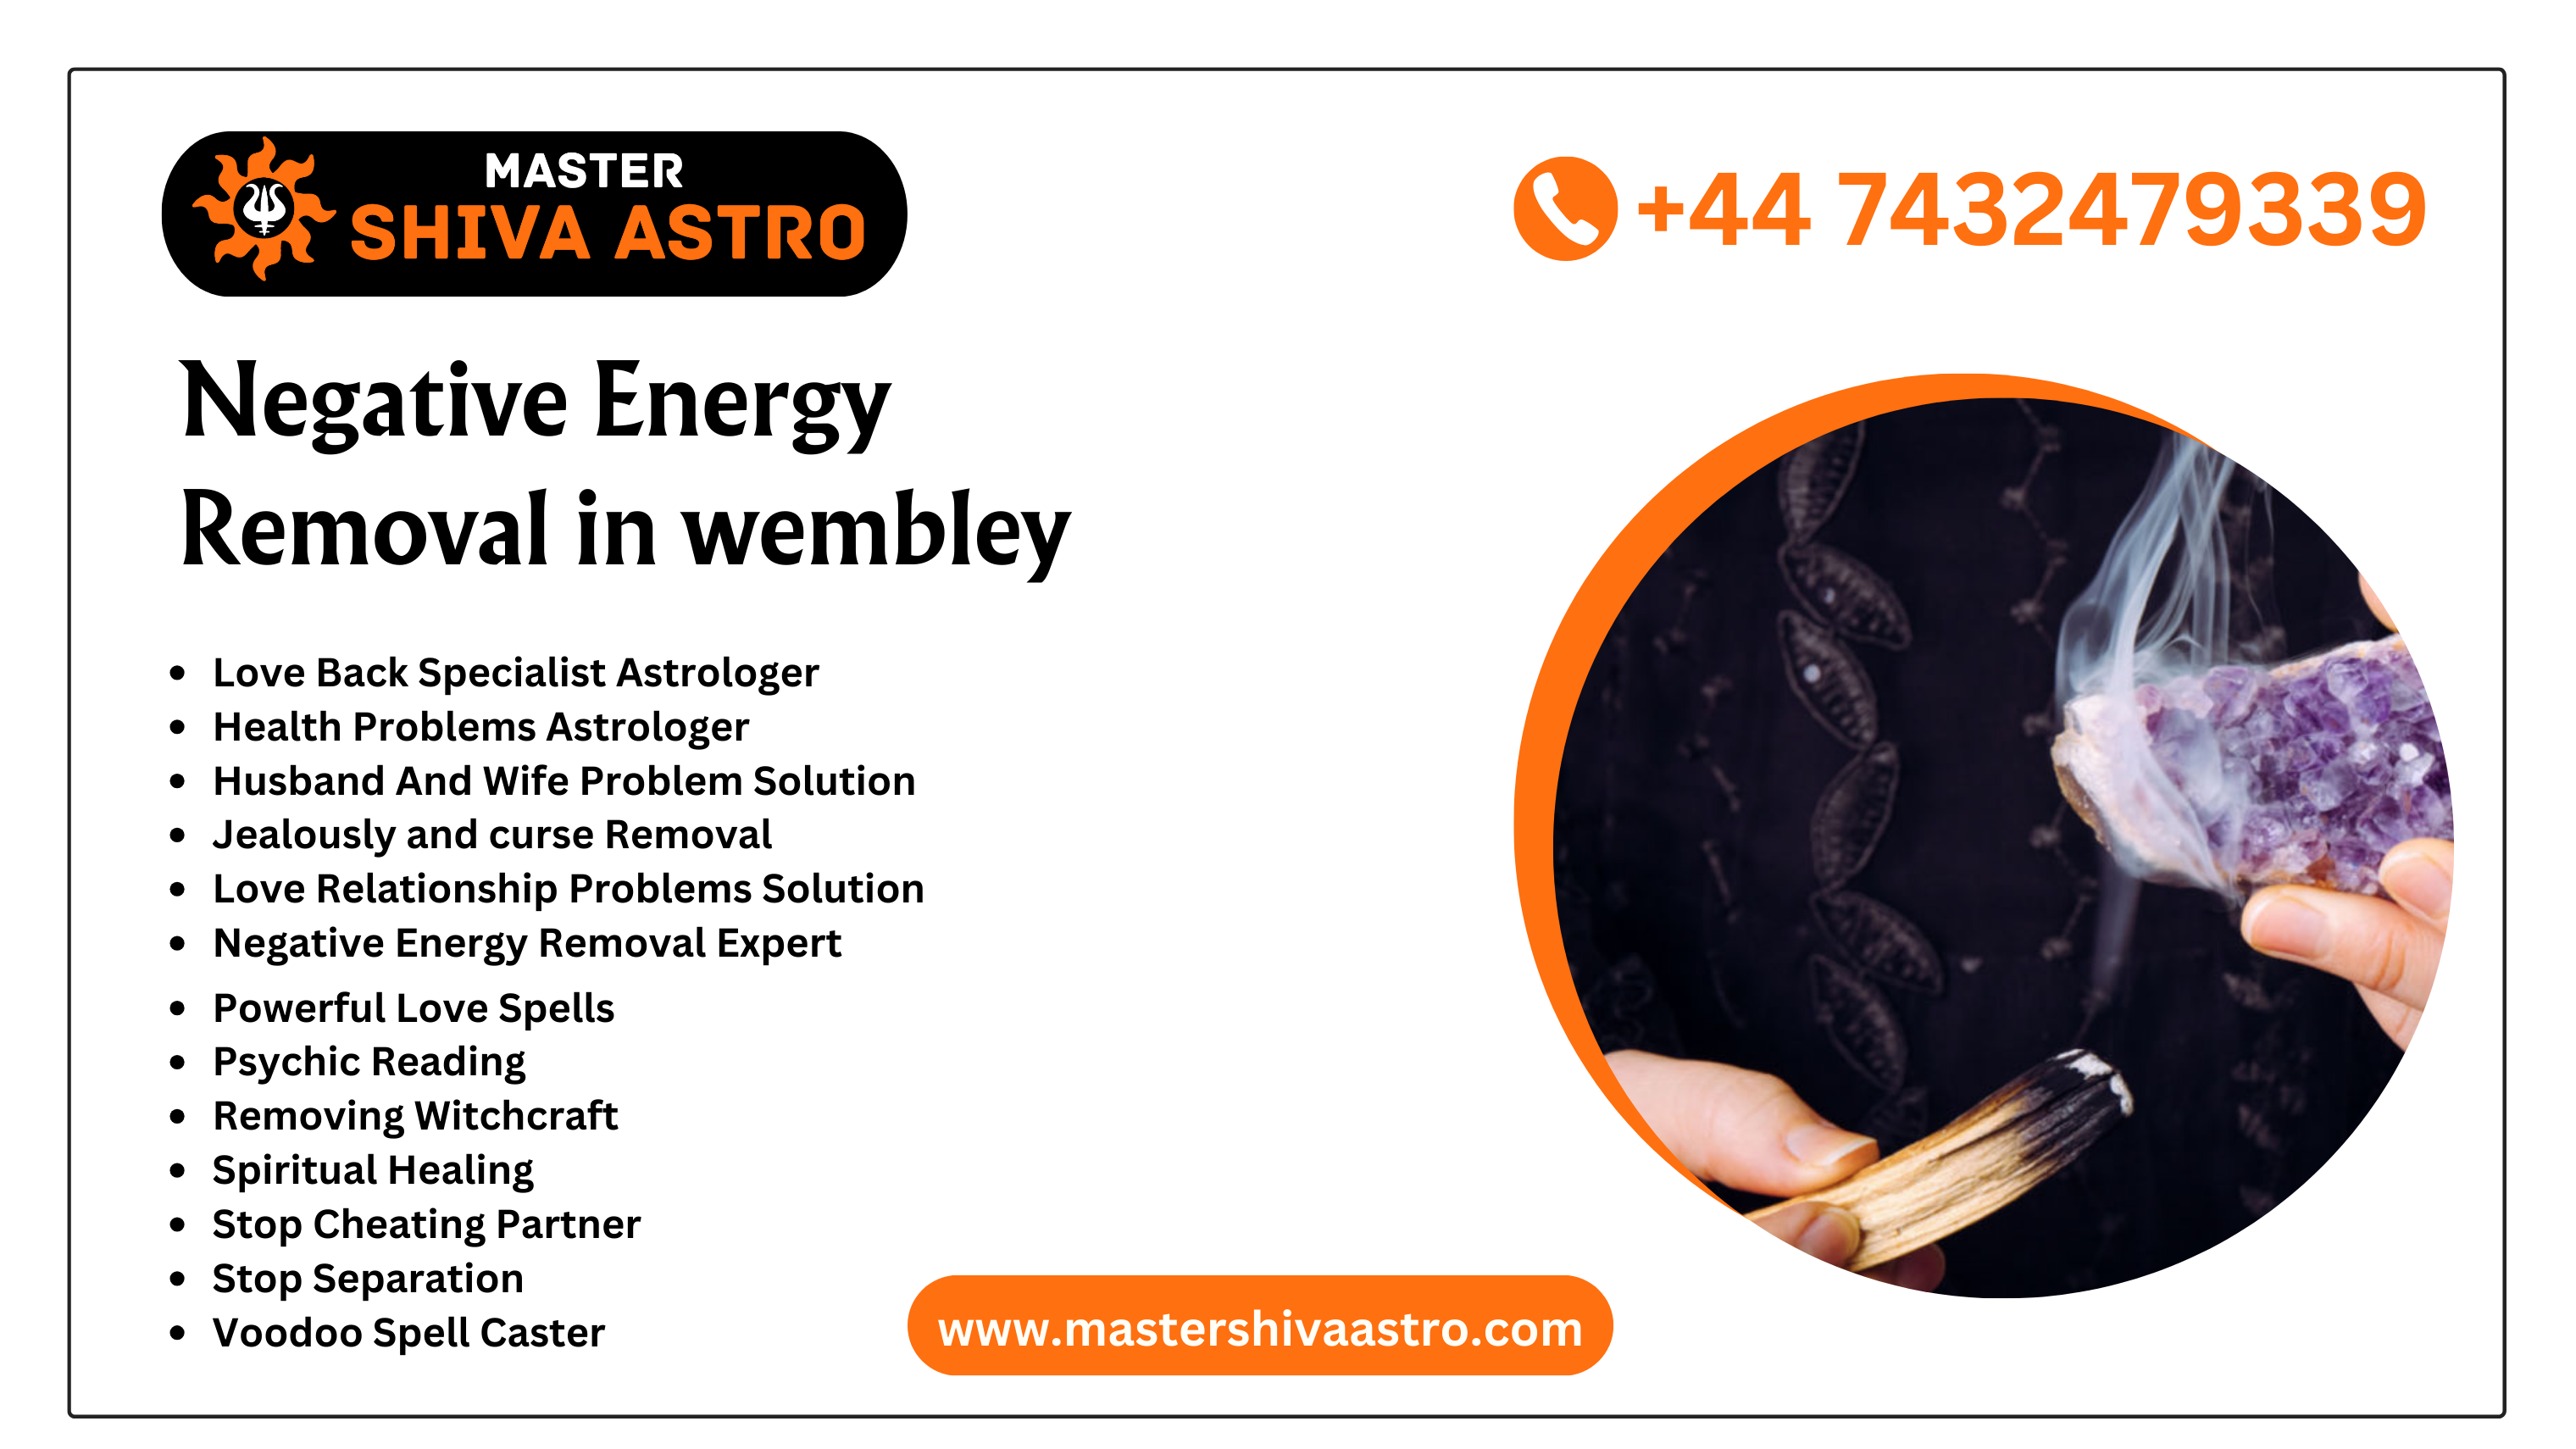 Negative Energy Removal in wembley - Master Shiva